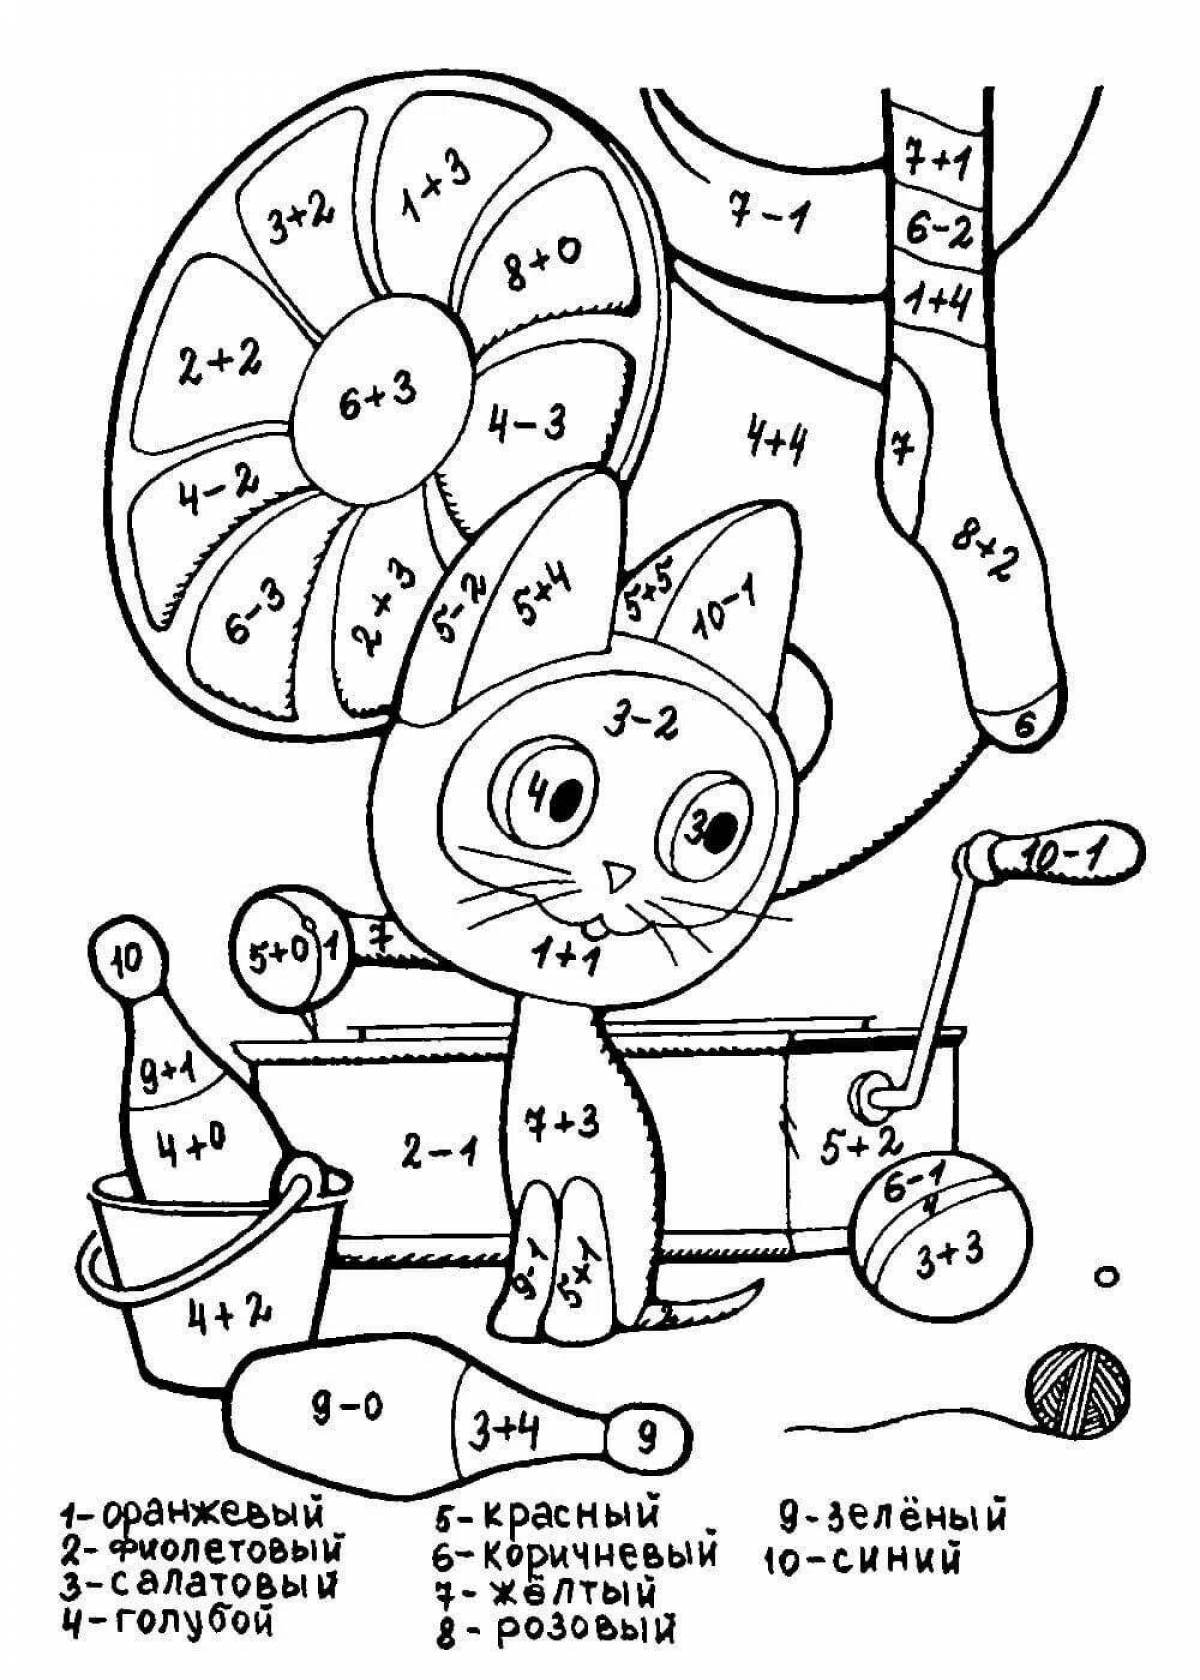 Stimulating math coloring pages for 6-7 year olds